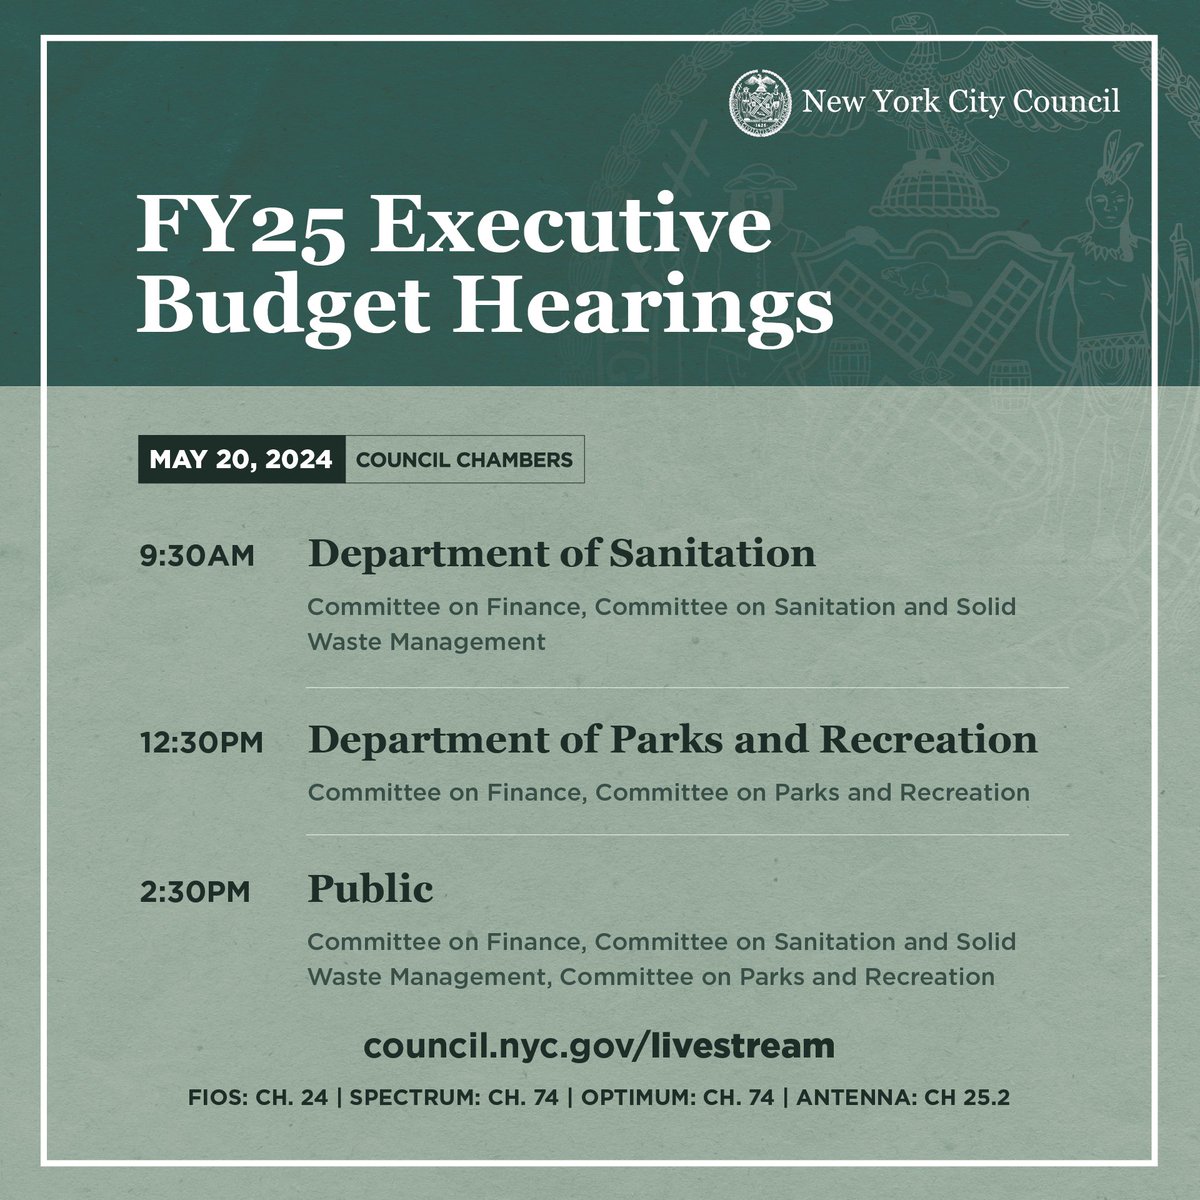 Tune in Monday for Day 10 of our FY25 Executive Budget Hearings, featuring testimony from @NYCSanitation and @NYCParks. 📺 Watch live: council.nyc.gov/livestream/